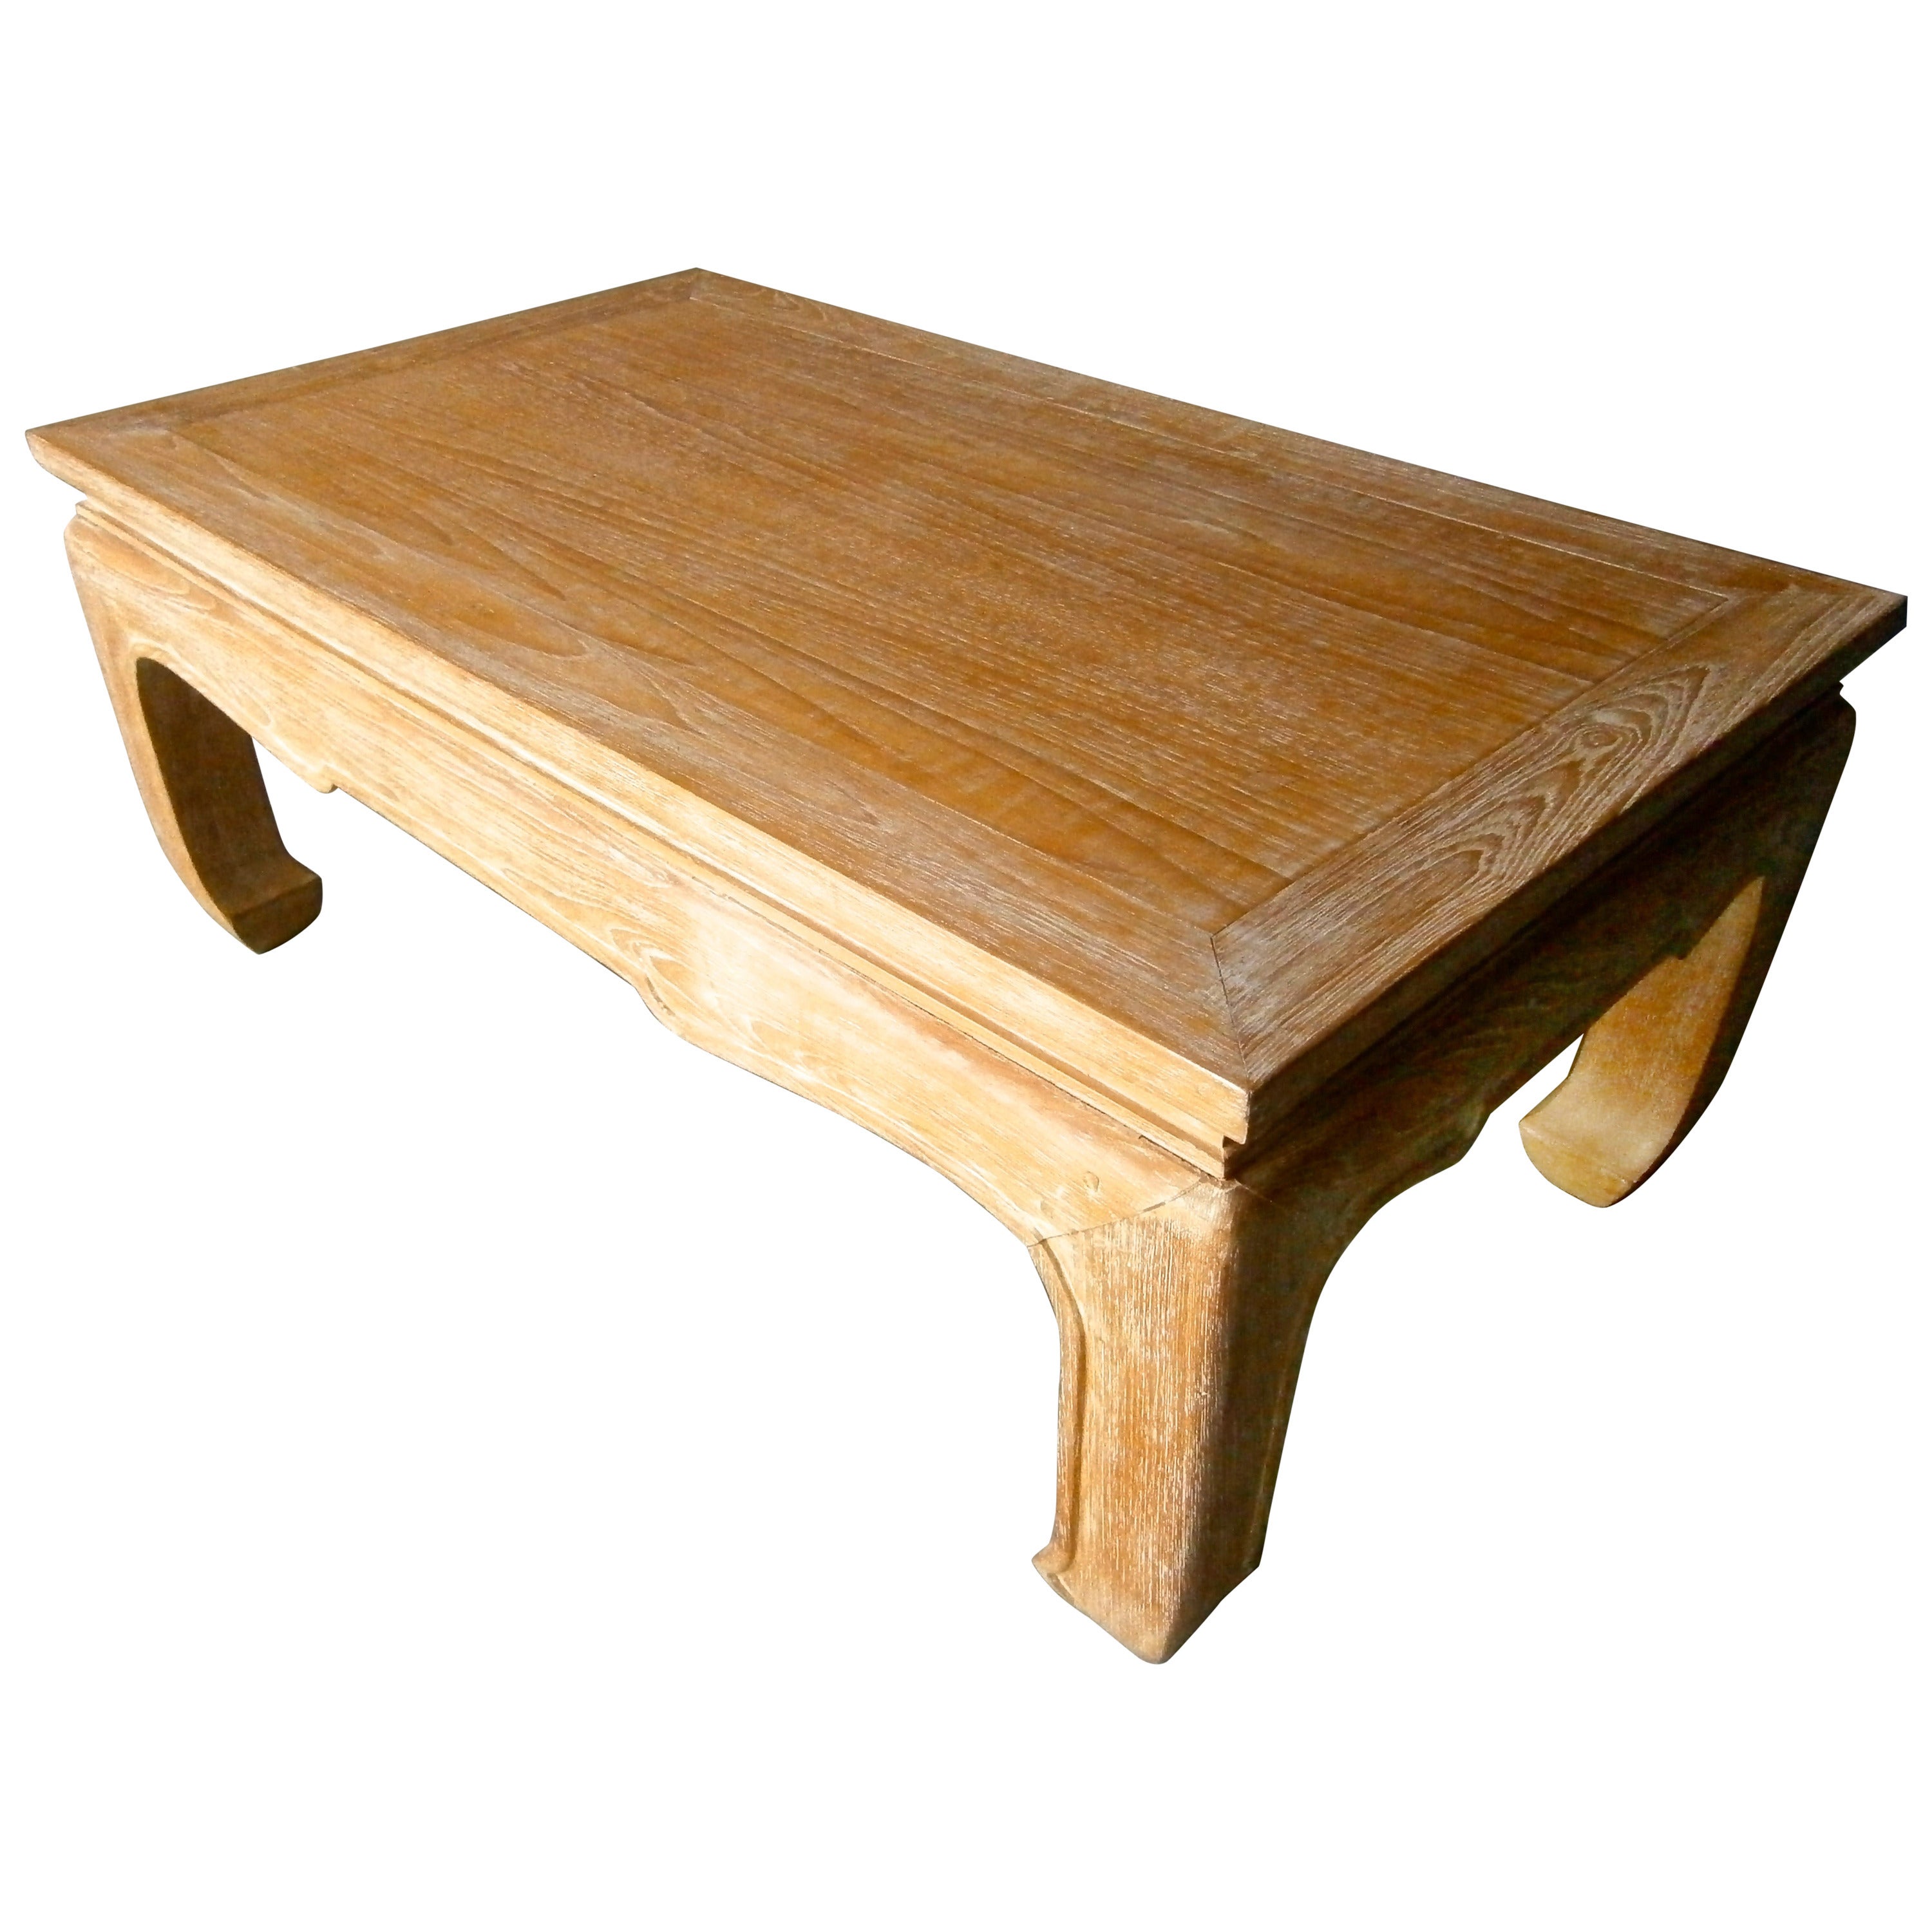 Chinese Limed Oak Rectangular Low Table C. 1960s For Sale